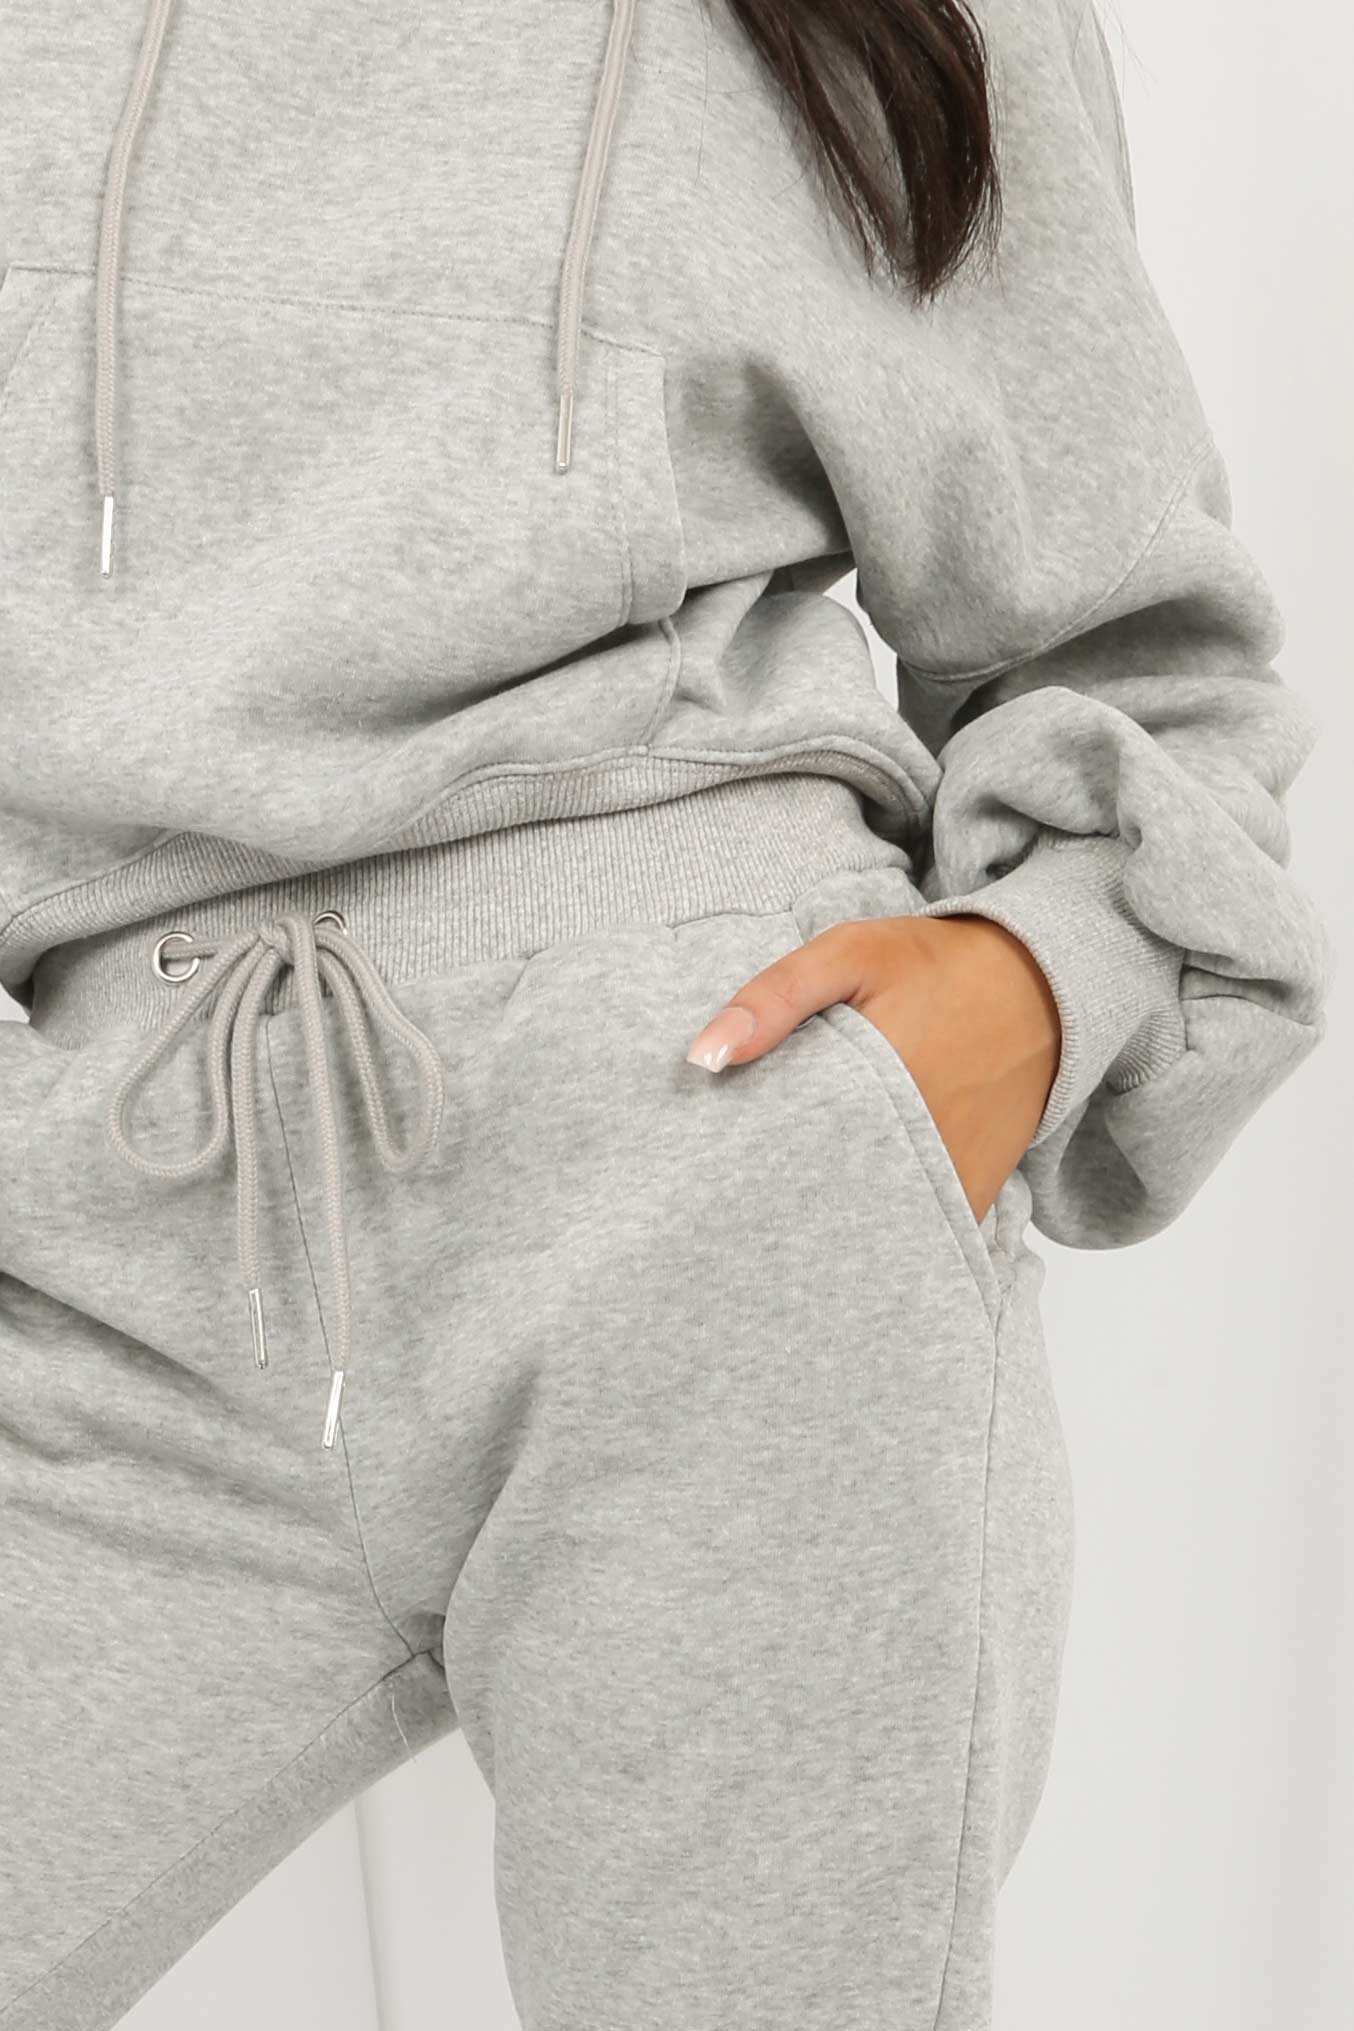 Gina grey ruched oversized hoodie and joggers set – Oh She Cute